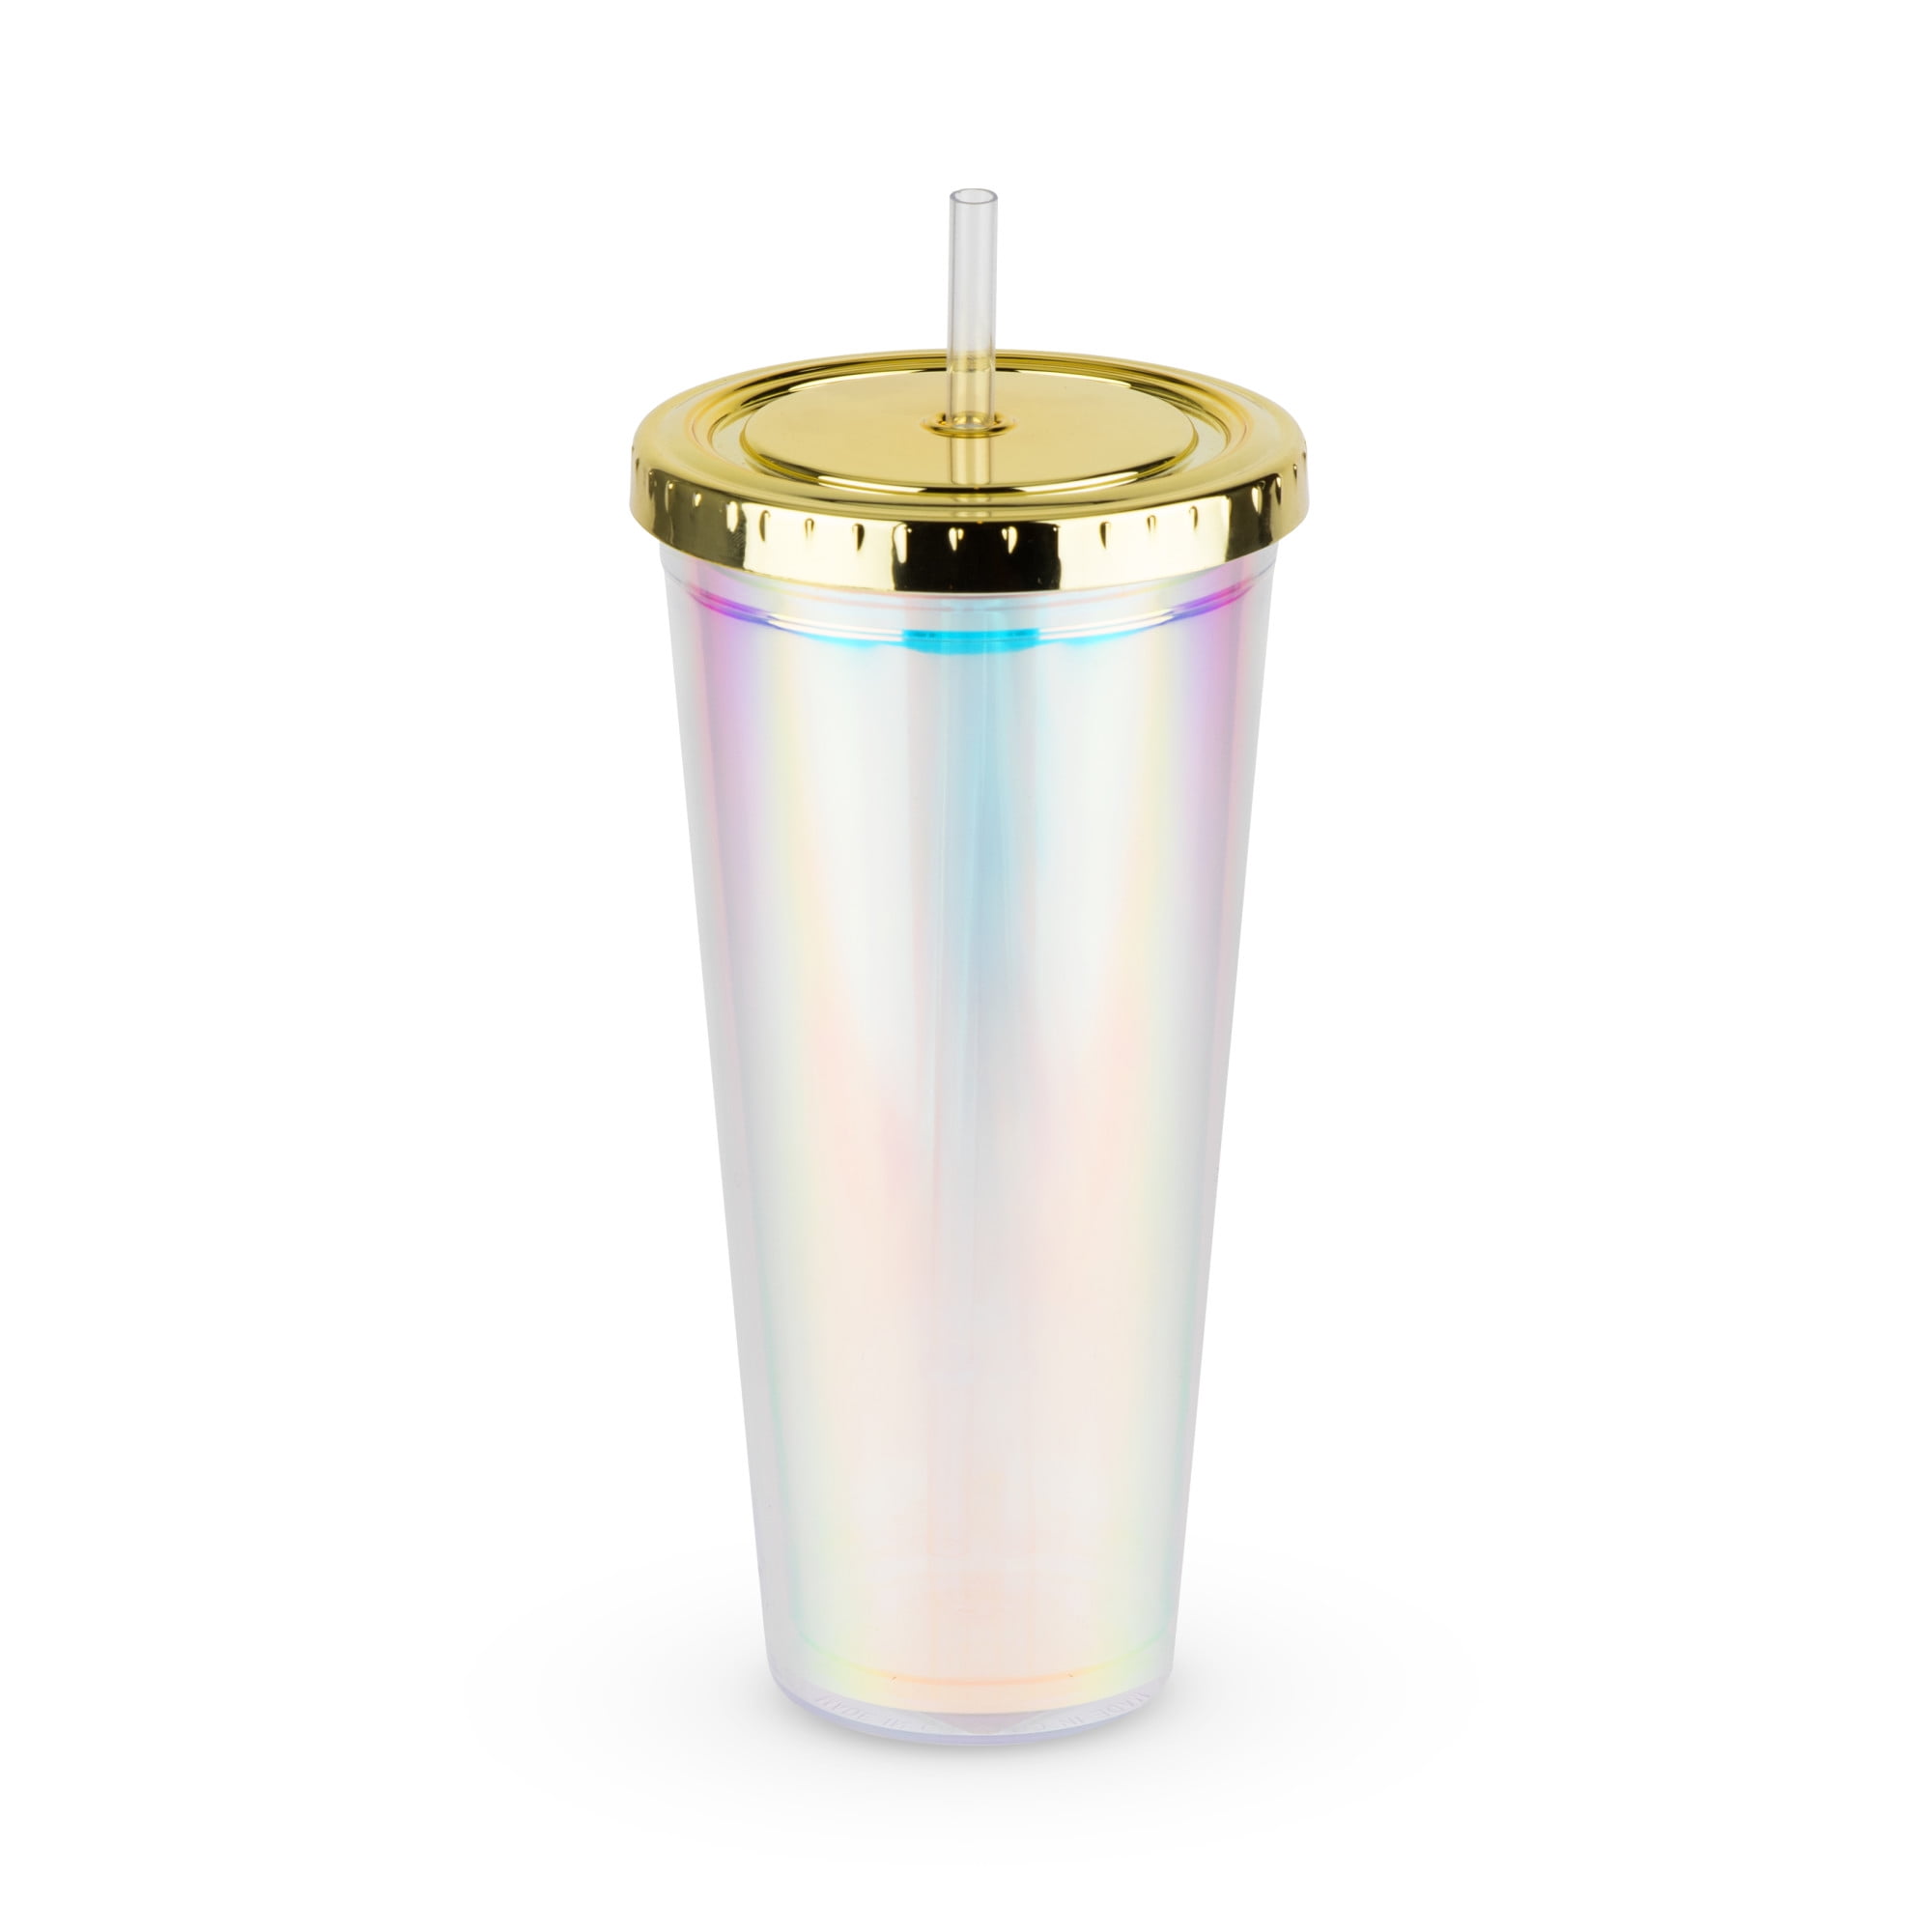 Your Zone Acrylic Iridescent Textured Tumbler with Straw - Ink - 16 oz